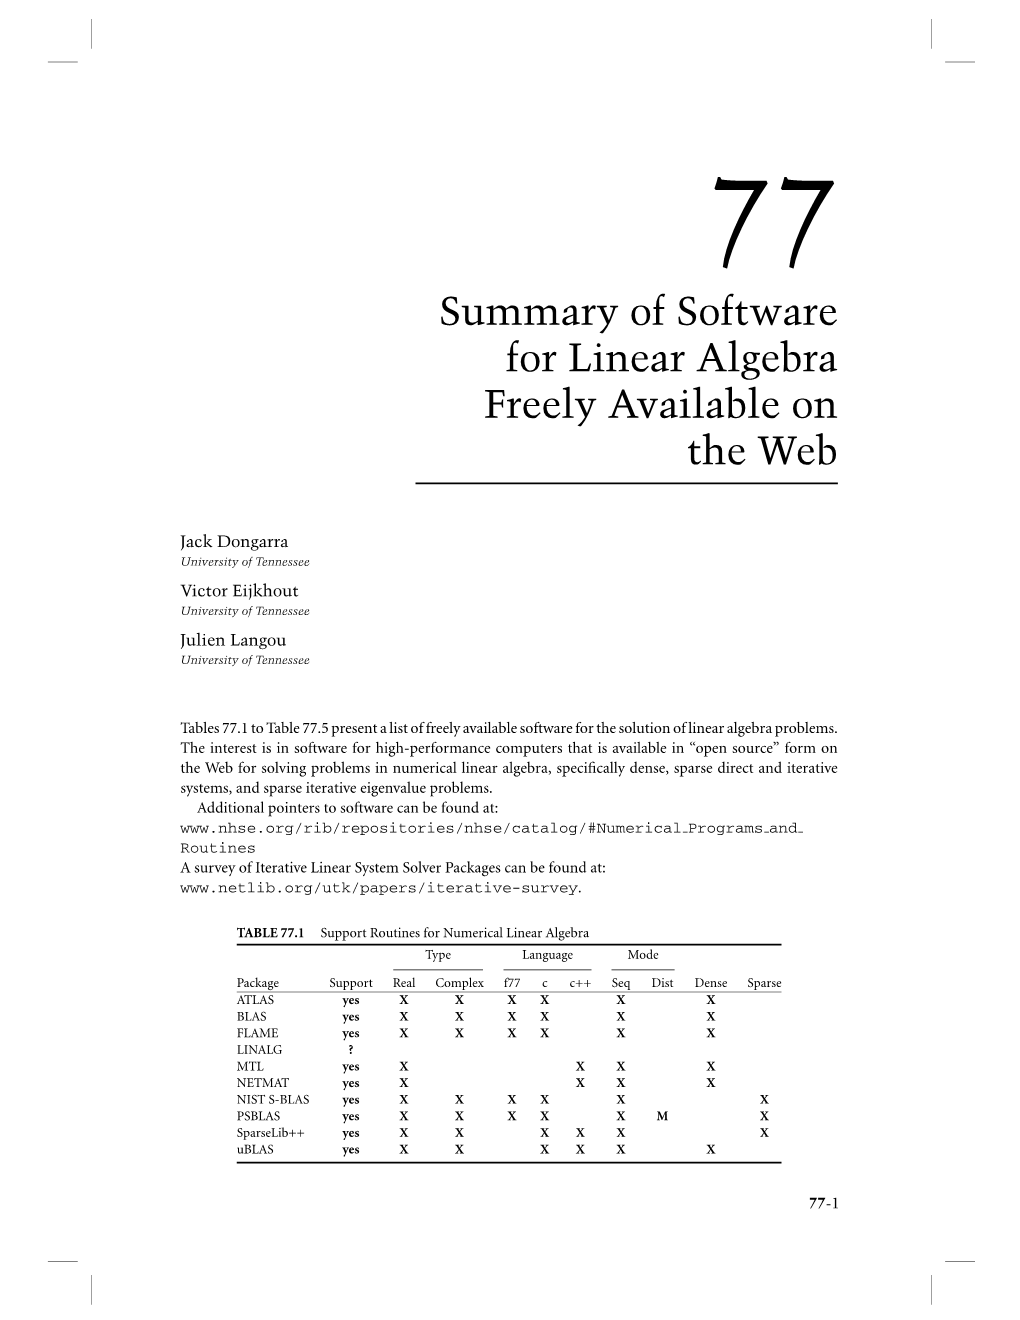 Summary of Software for Linear Algebra Freely Available on the Web